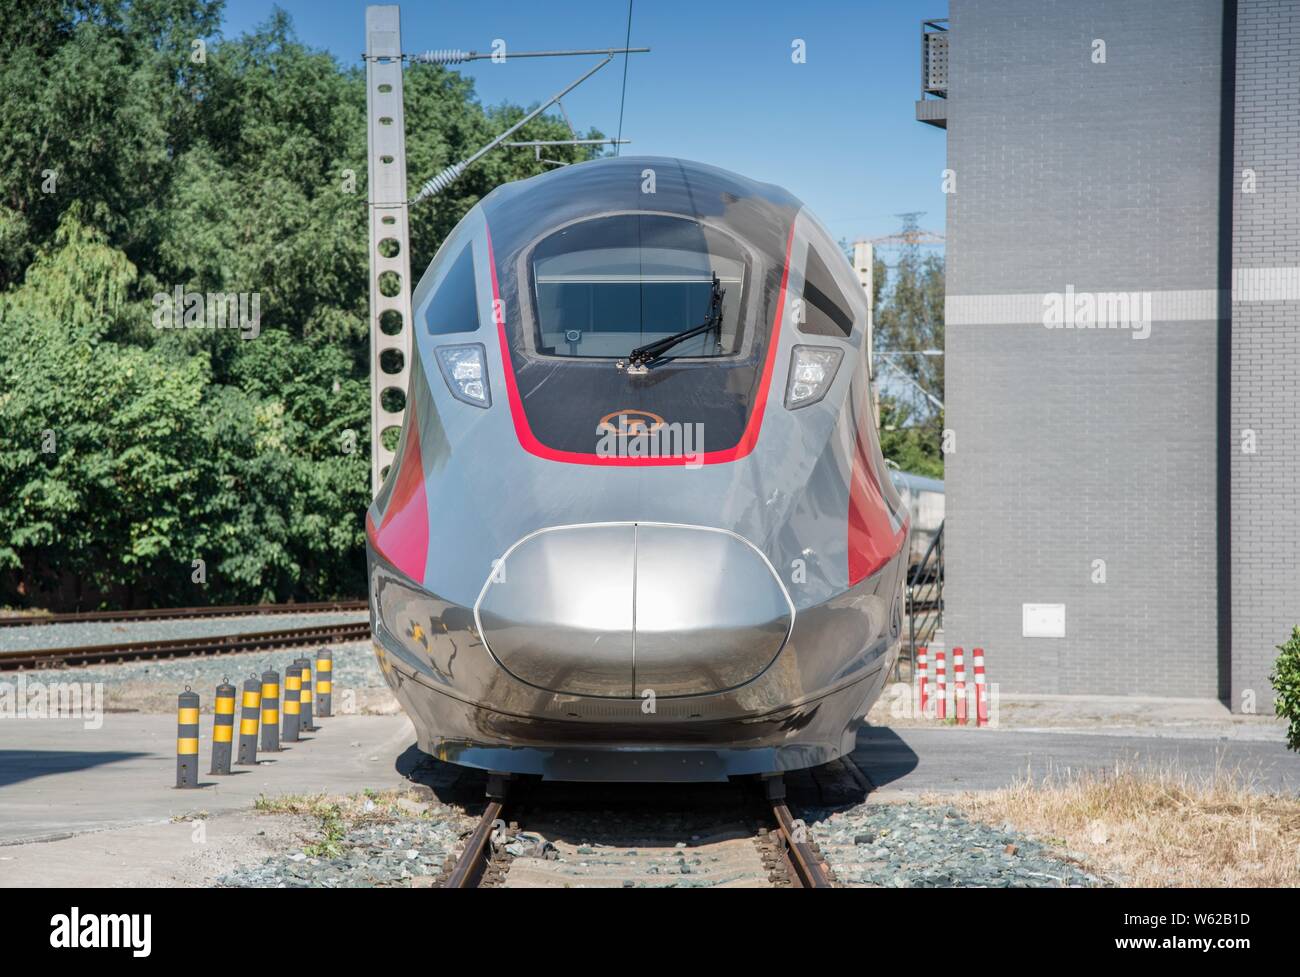 A new longer Fuxing high-speed bullet train, about 440 meters long with 17 cable cars, is seen during a test run at a testing ground in Beijing, China Stock Photo